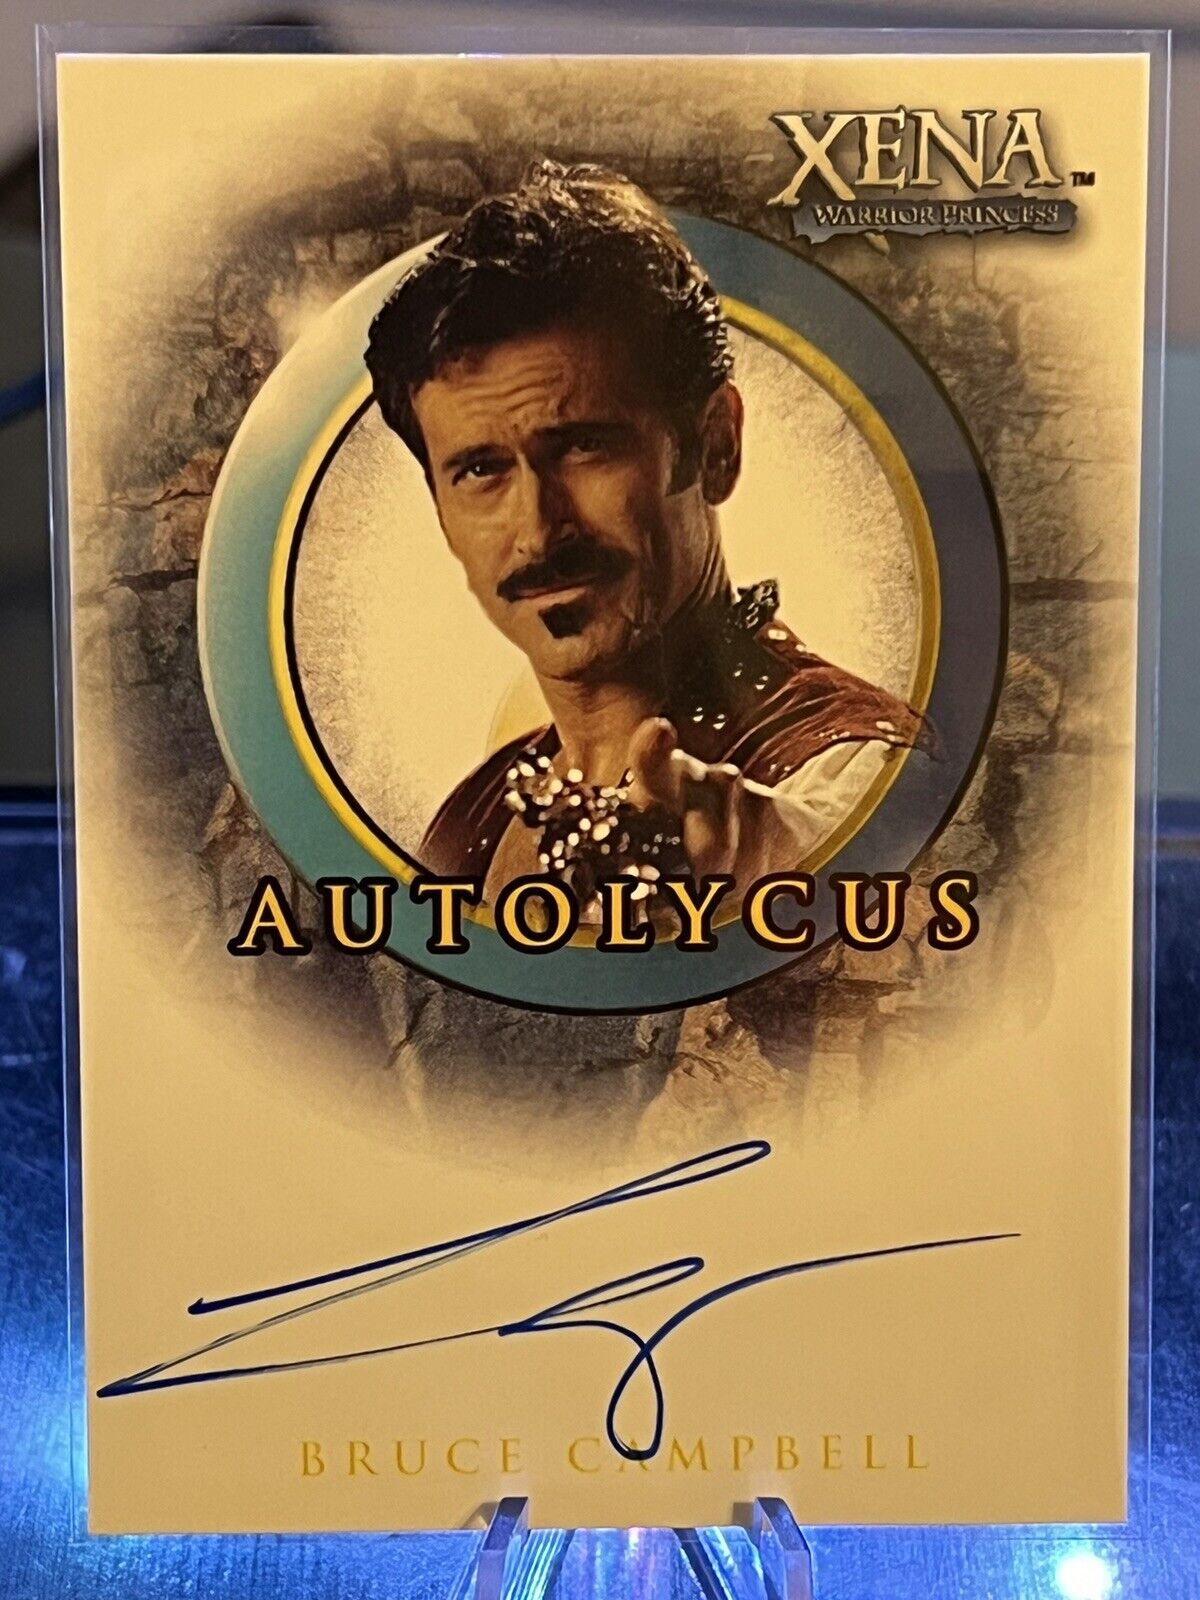 The Quotable Xena Warrior Princess Bruce Campbell as Autolycus as Autograph Card